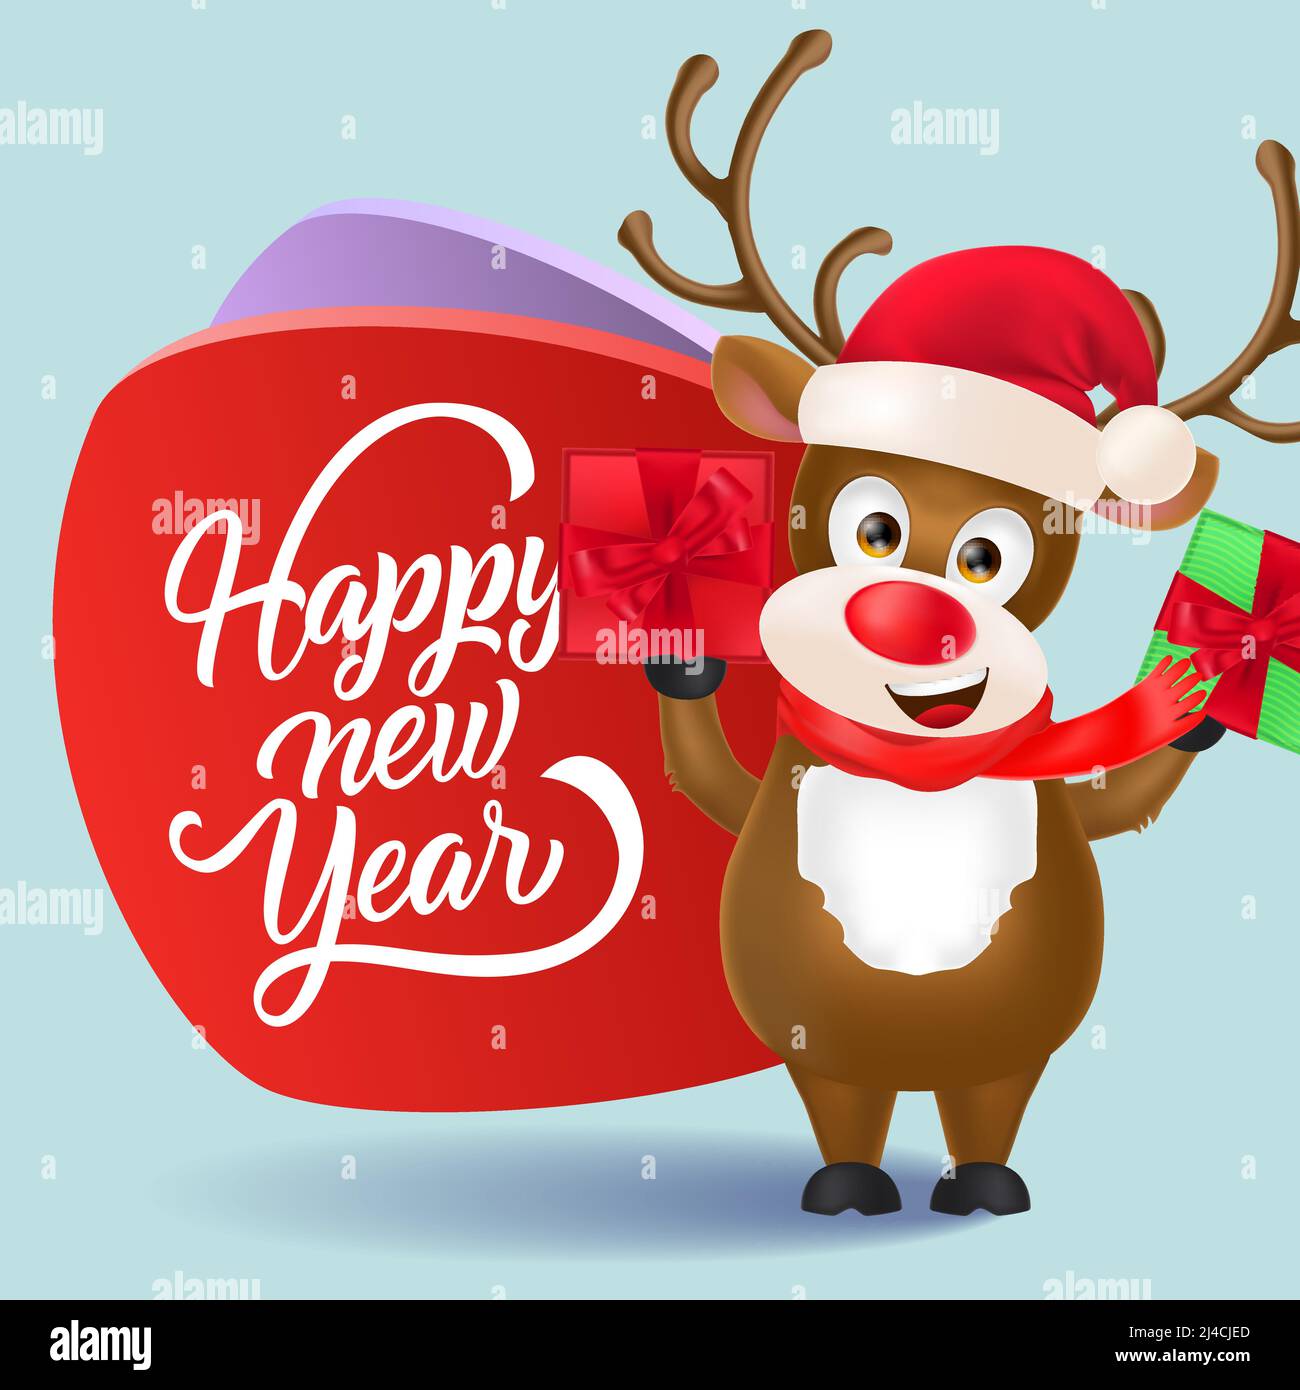 3 - Stock Images santa - Alamy rudolph Vector For and Page